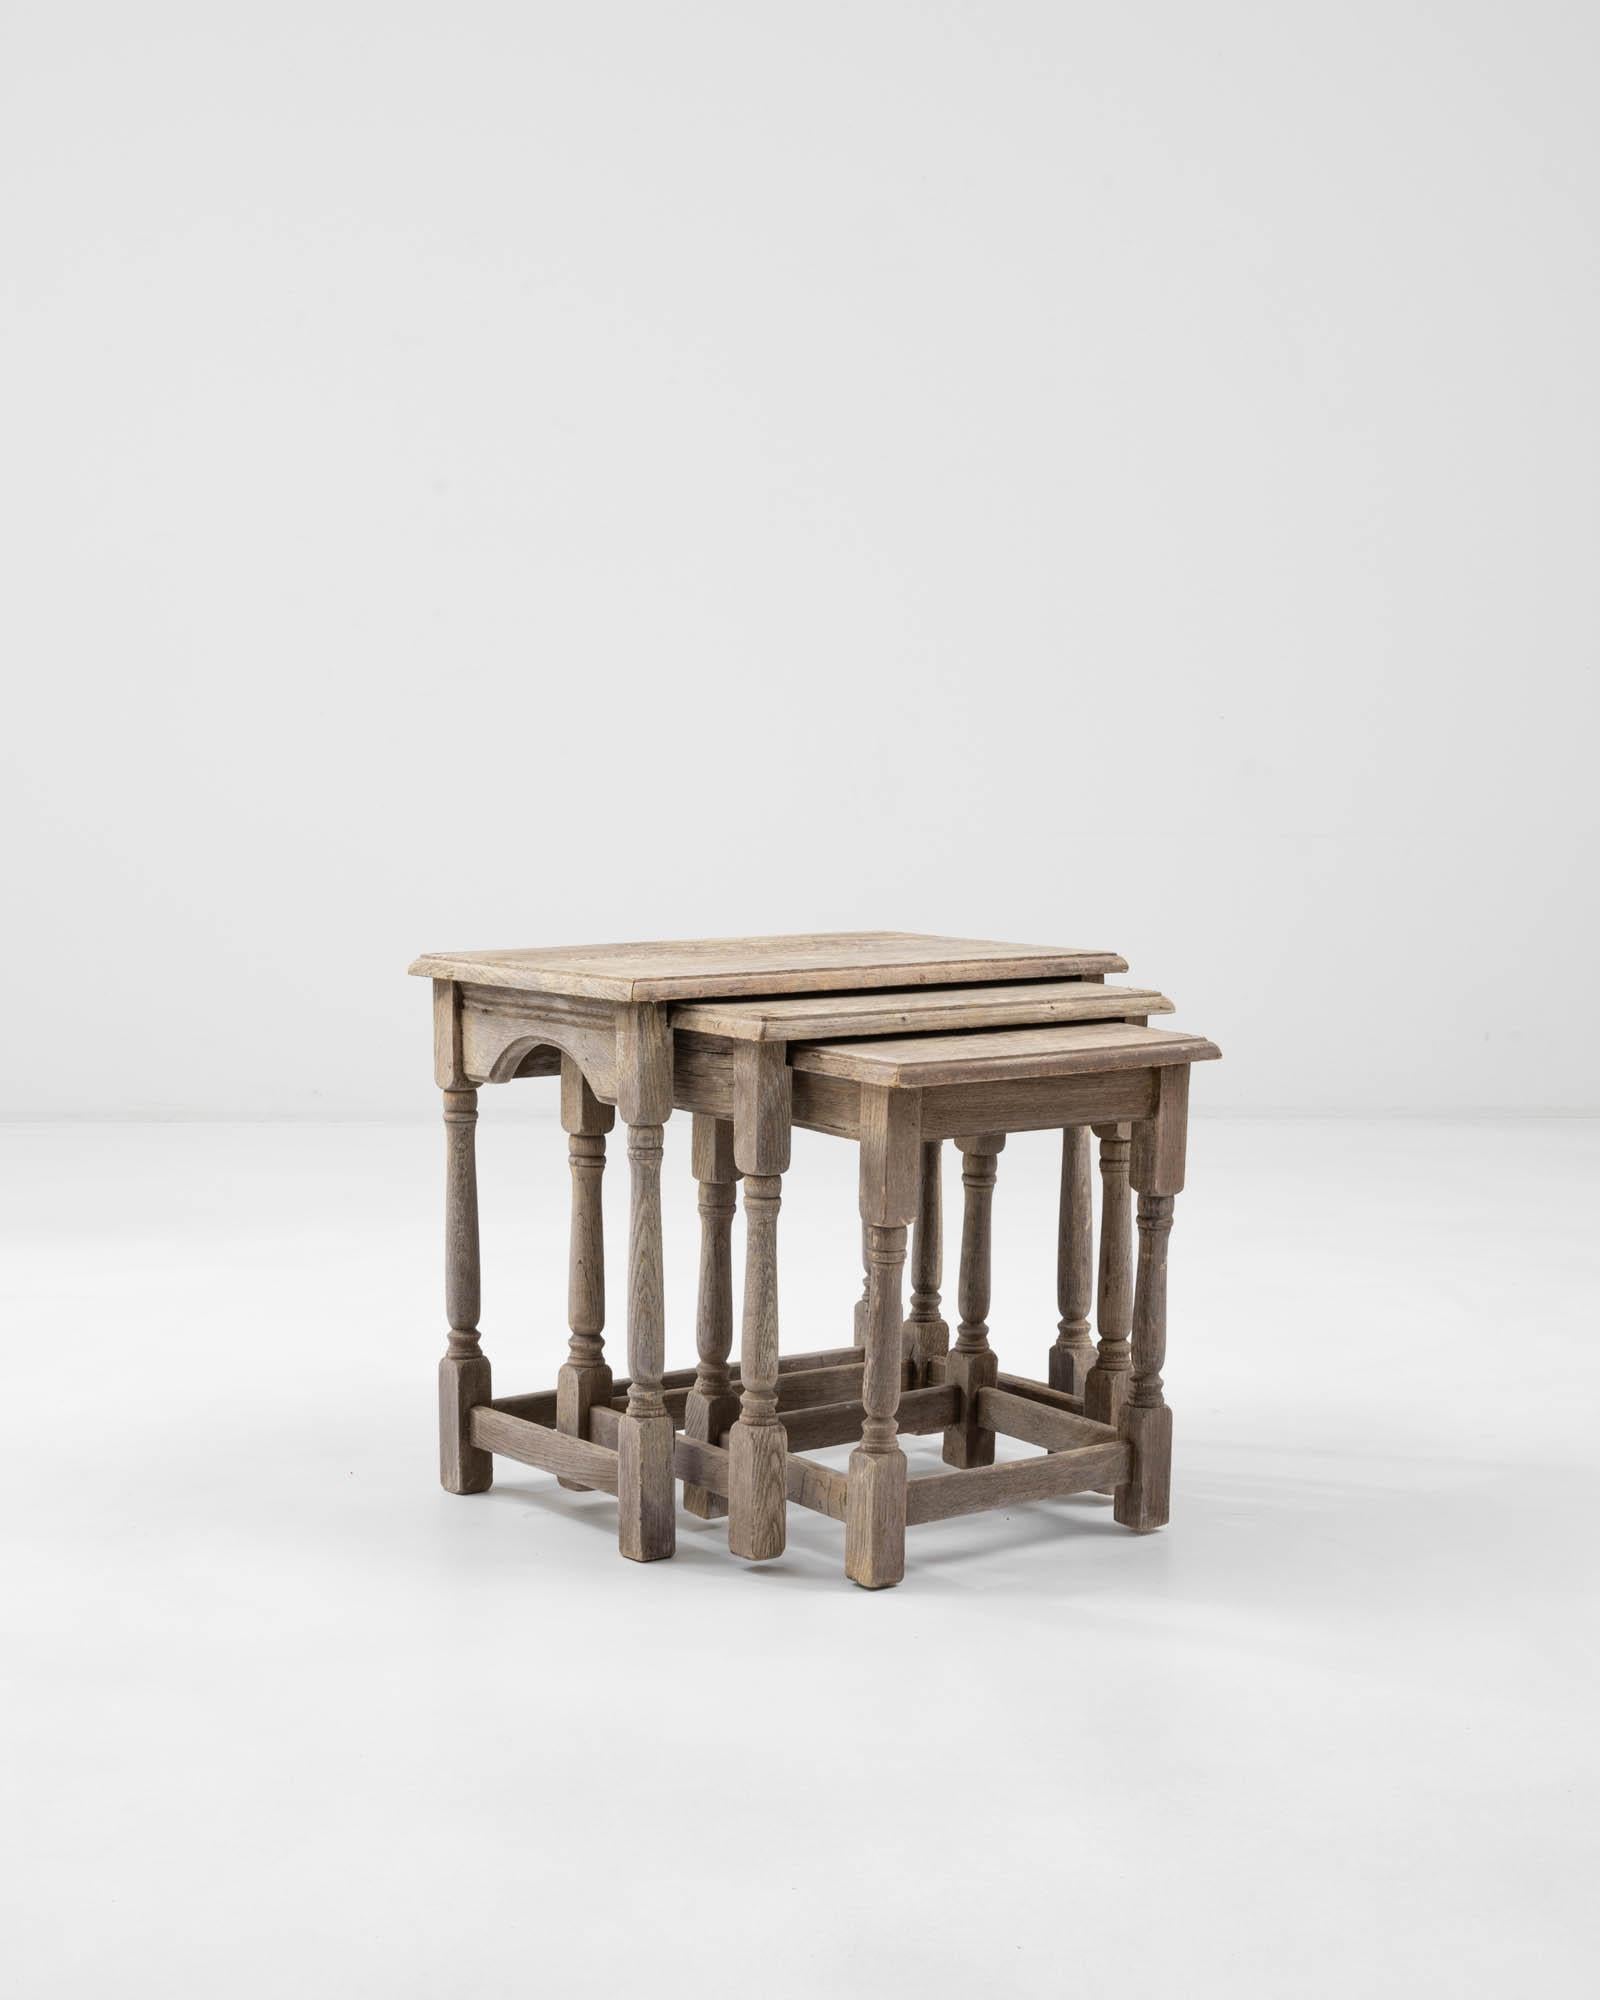 Crafted in Belgium, this vintage nesting table presents a cozy set of three. The tables, with baluster legs, mirror each other in an intriguing Escherian manner when they are put together. The bleached oak finish gives a rustic touch, endowing this